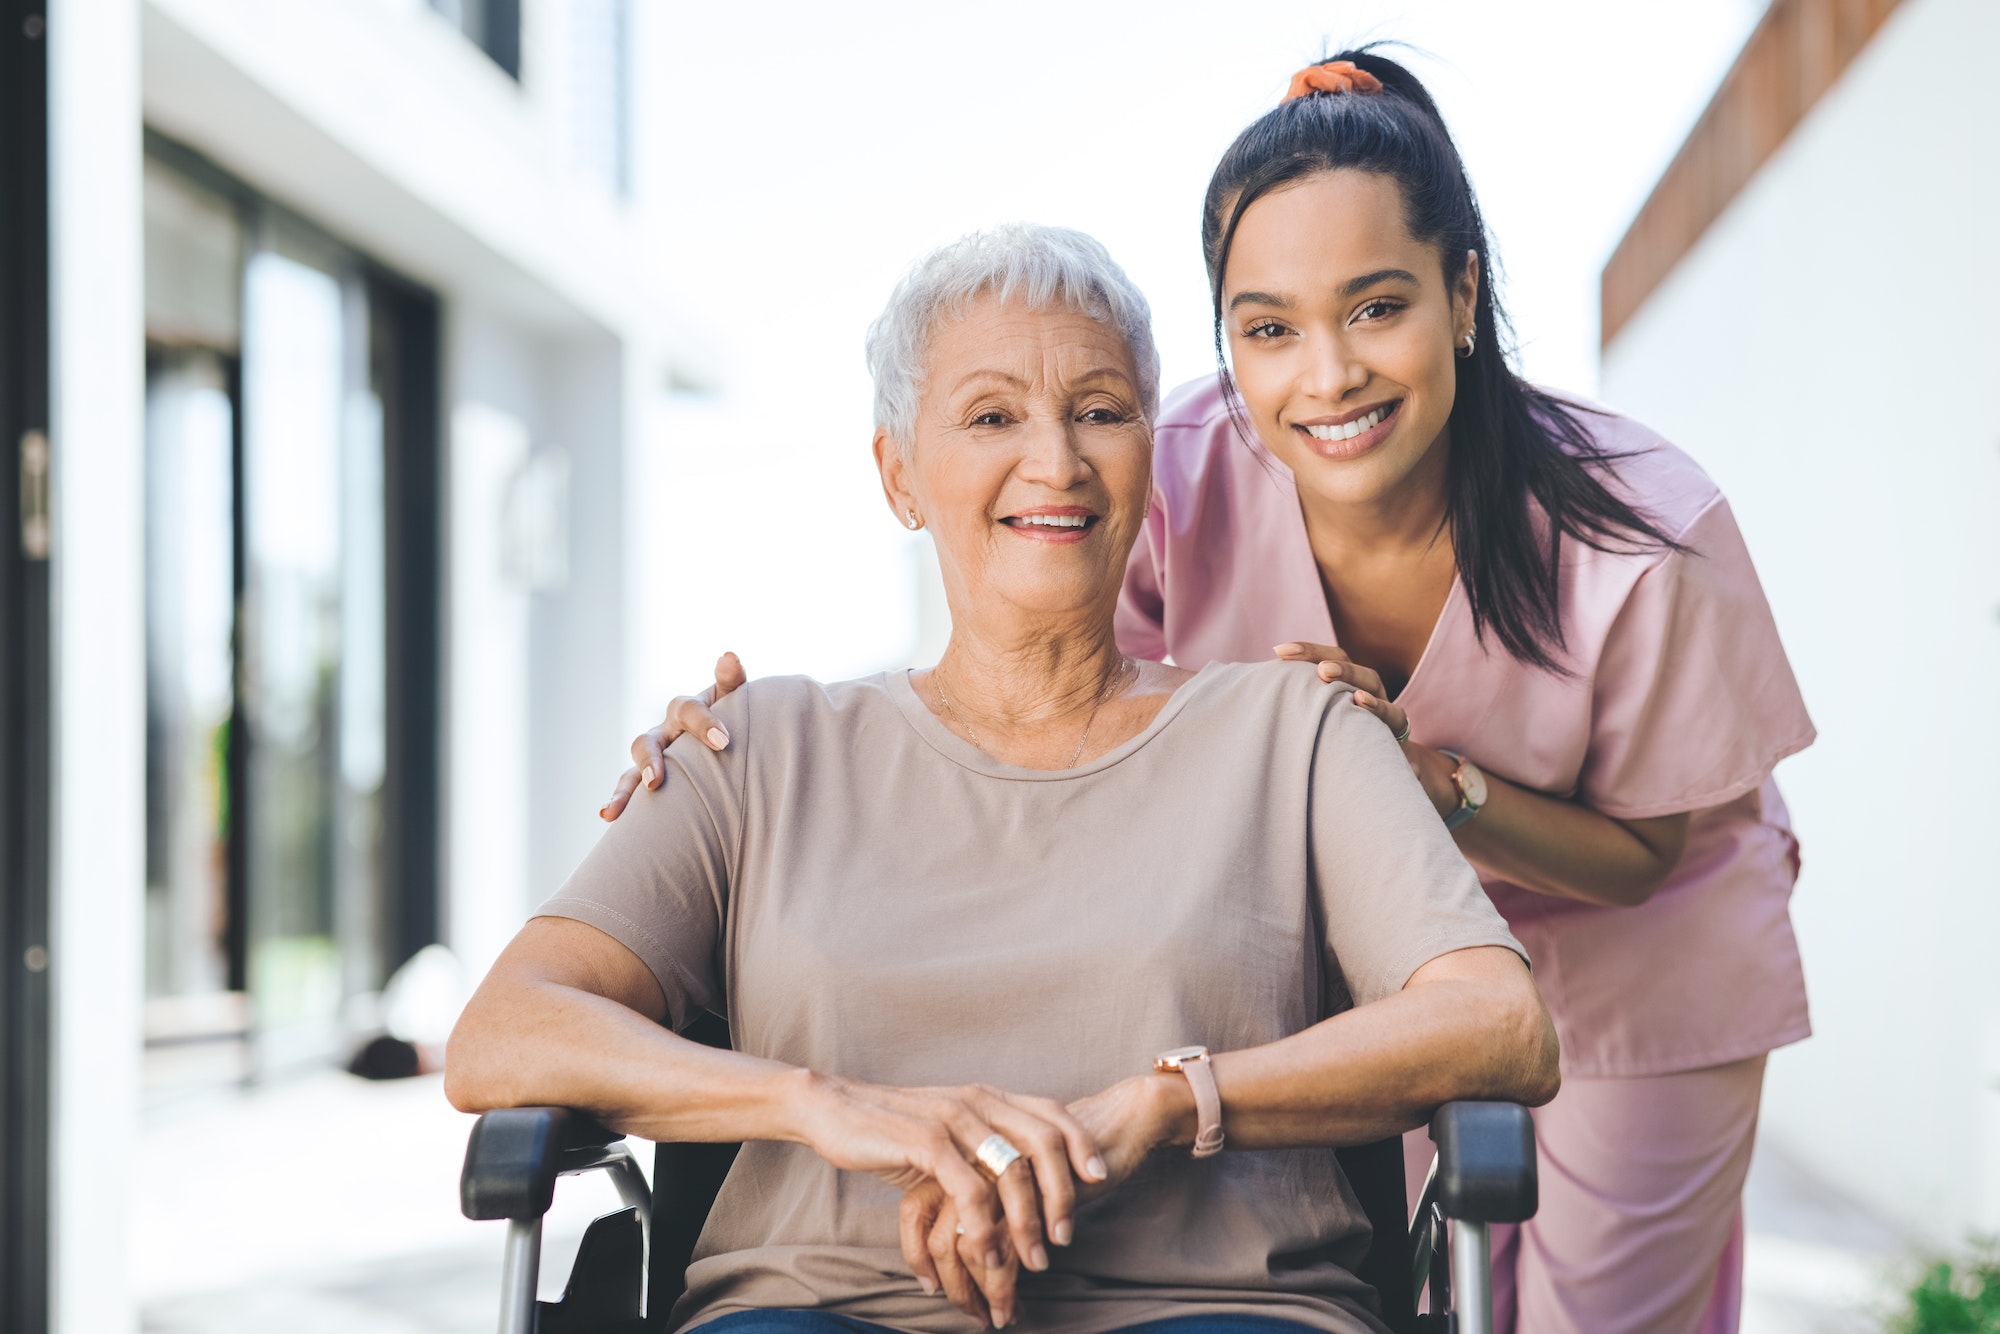 Portrait of a young nurse caring for an older woman in a wheelchair